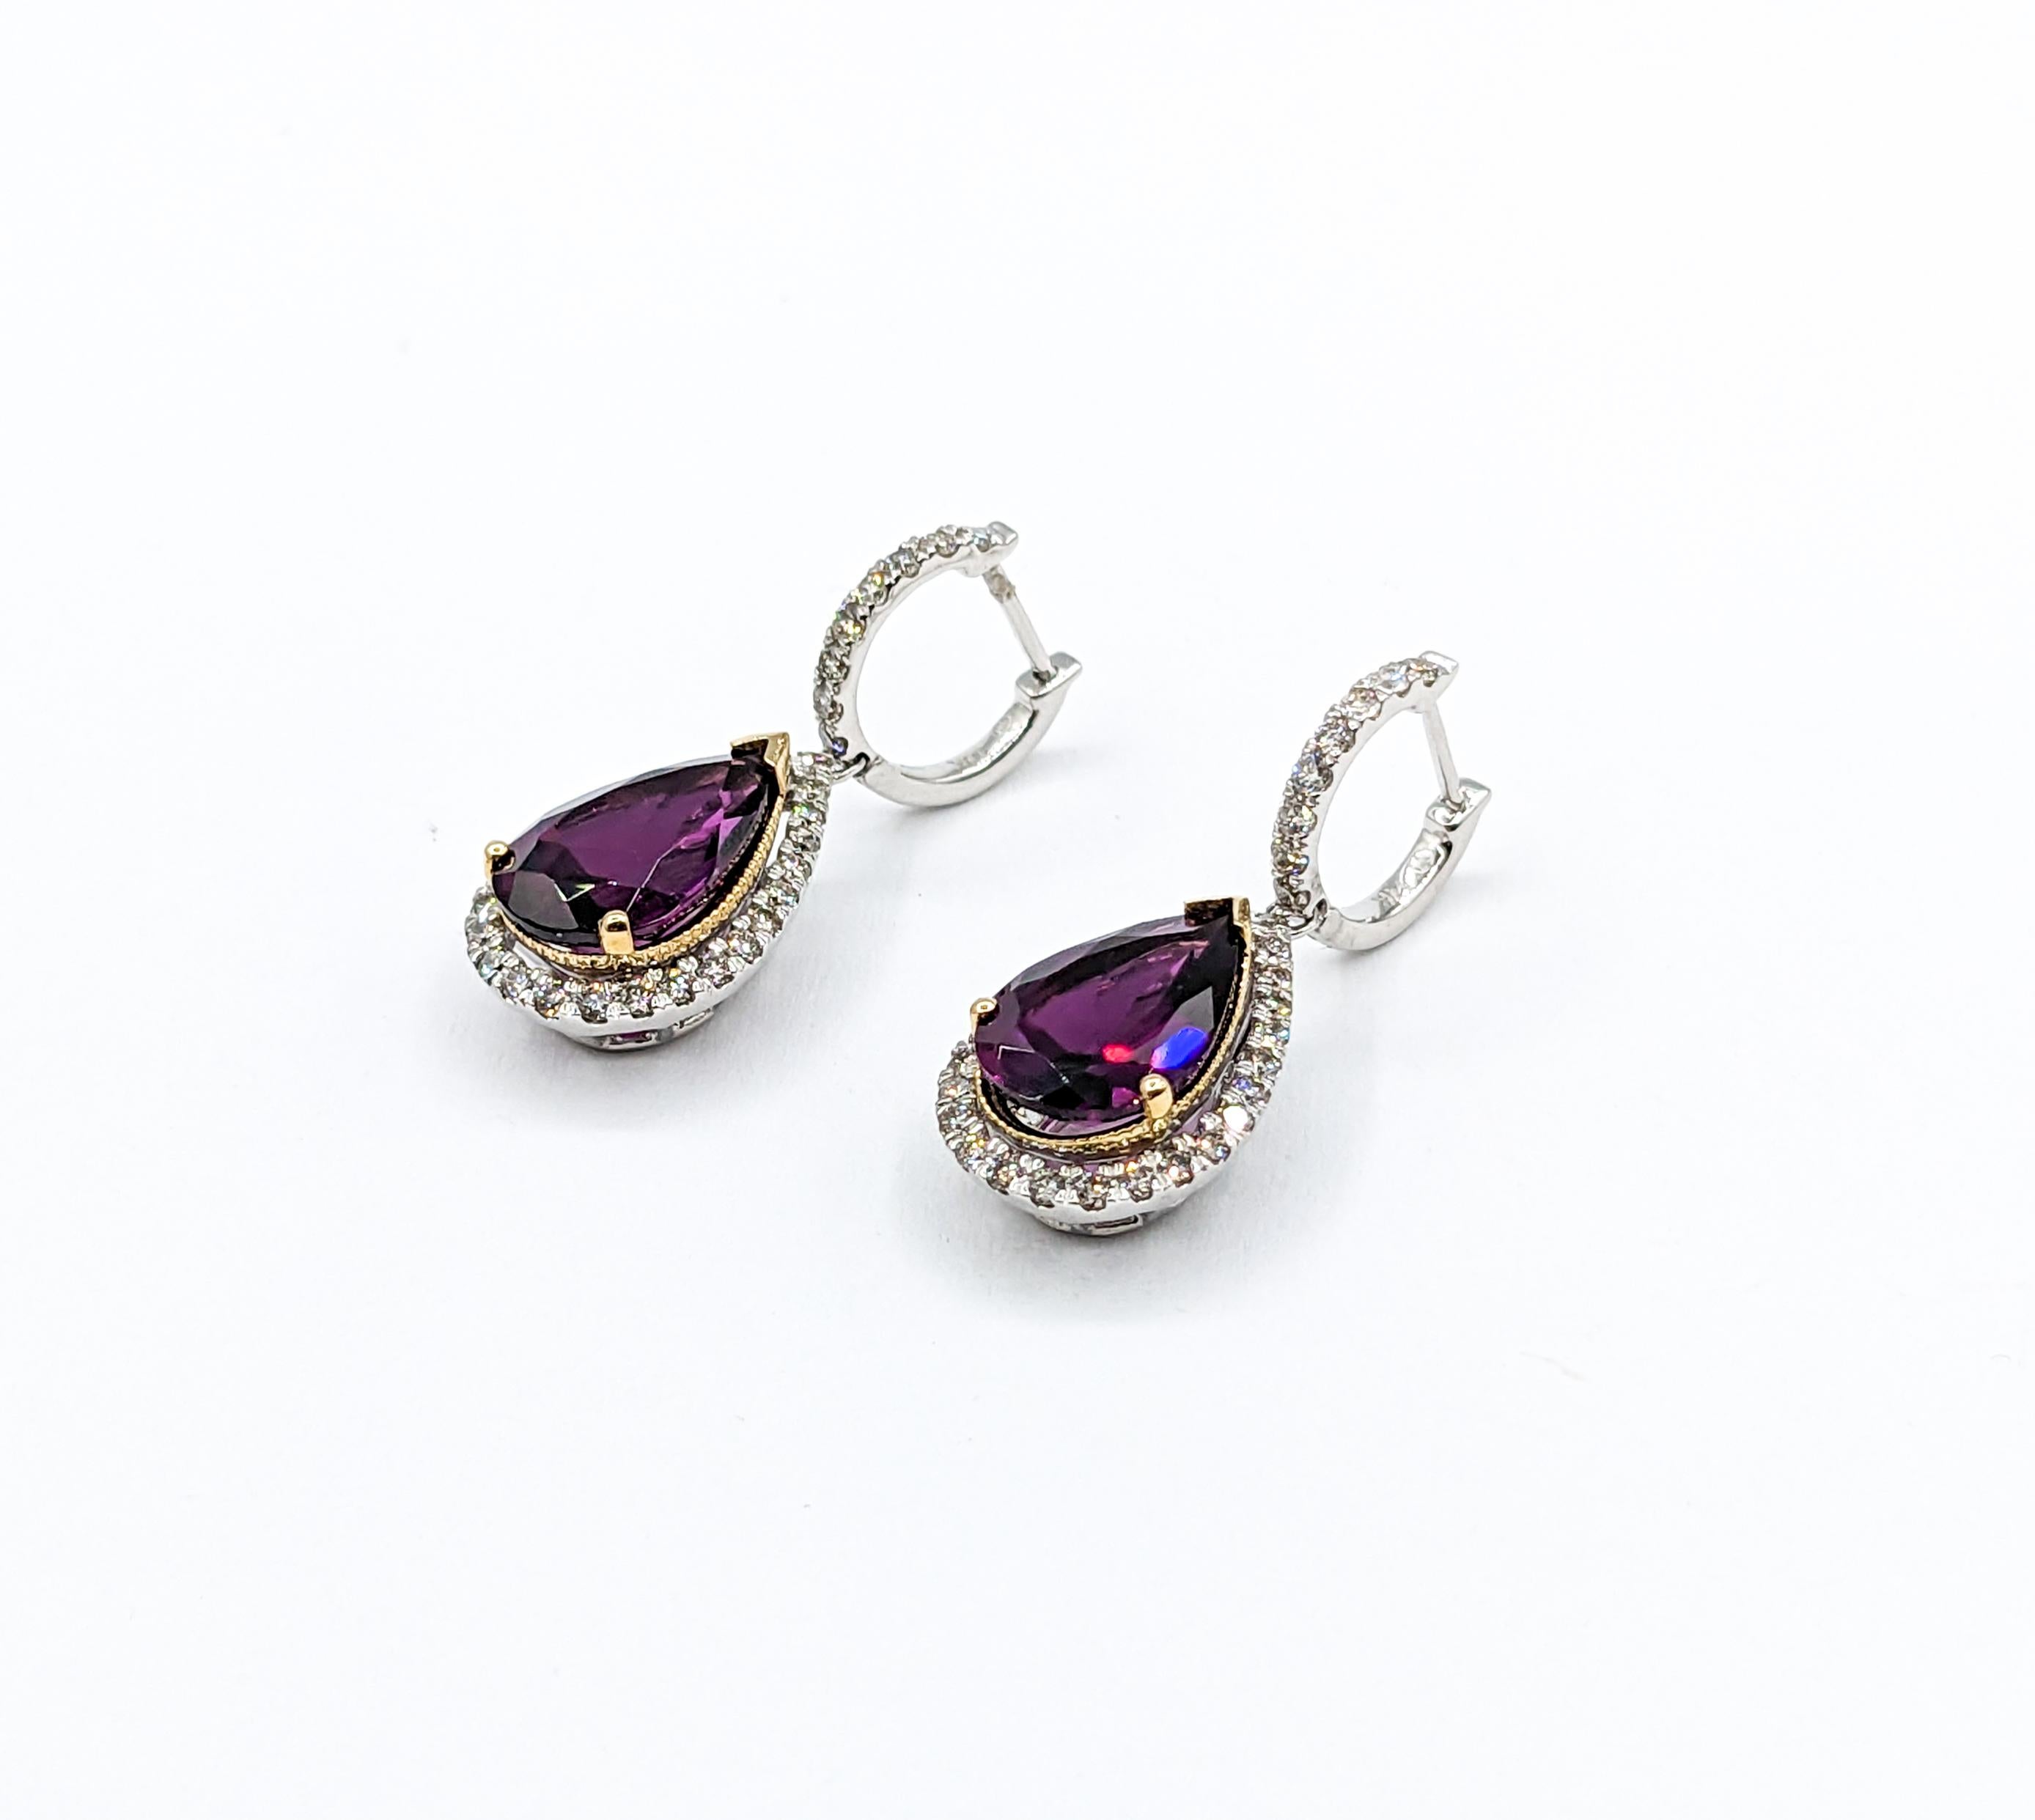 Rhodolite Garnet & Diamond Drop Earrings

Presenting an exquisite pair of earring, masterfully crafted in Rhodolite Garnet pear earrings in 14k white gold with yellow gold accents. These earrings feature gorgeous pair of pear shaped Rhodolite